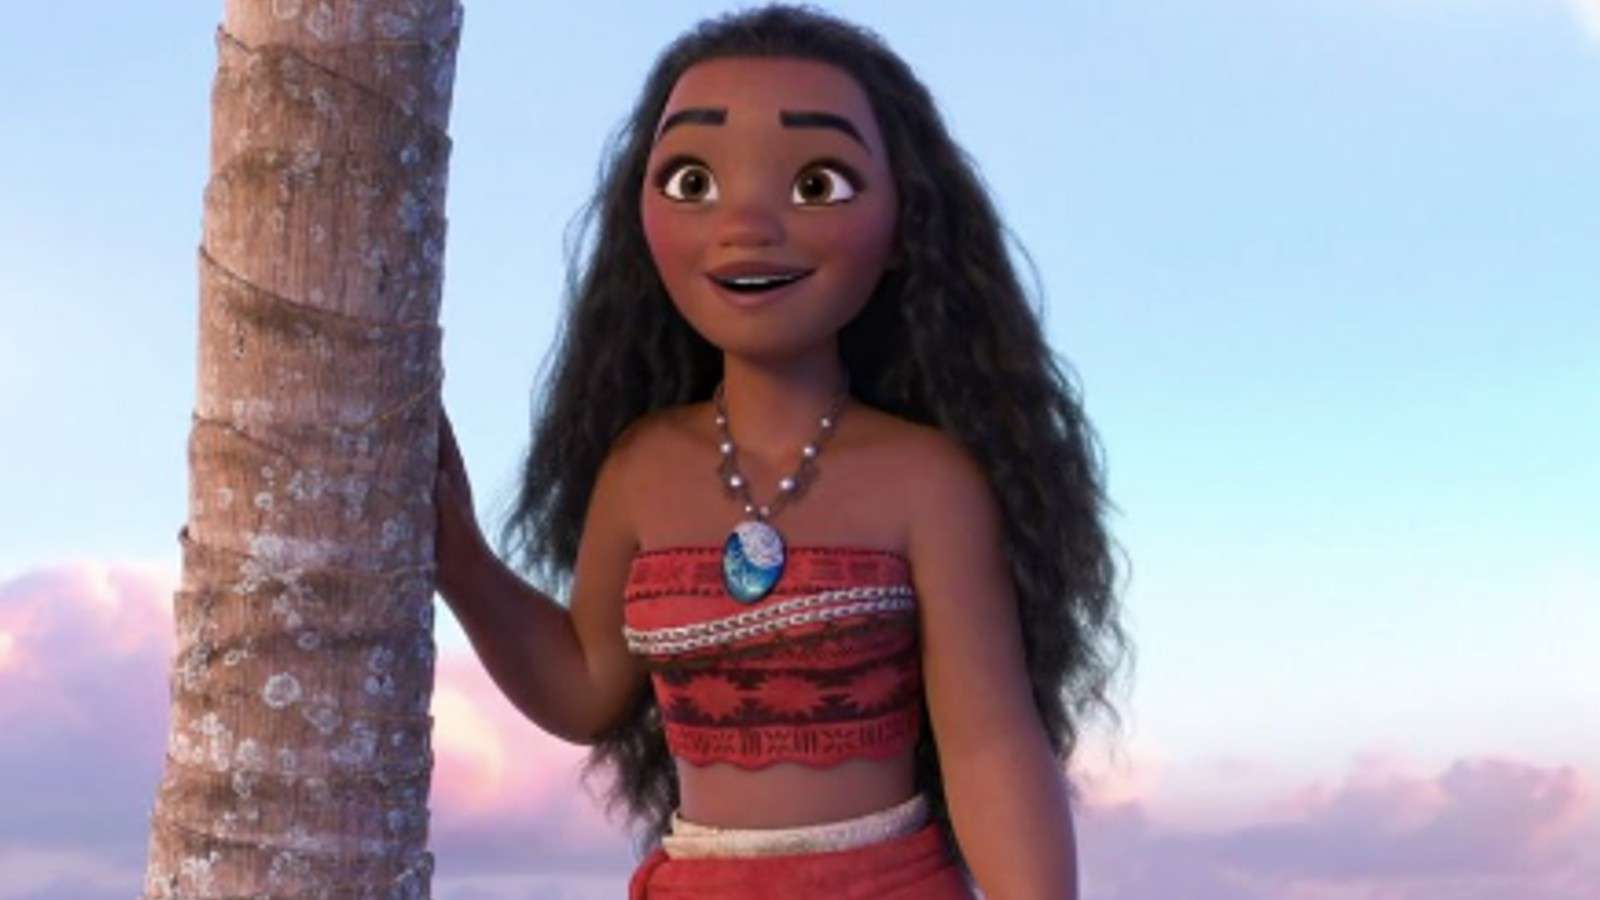 Moana stands by a palm tree in Moana